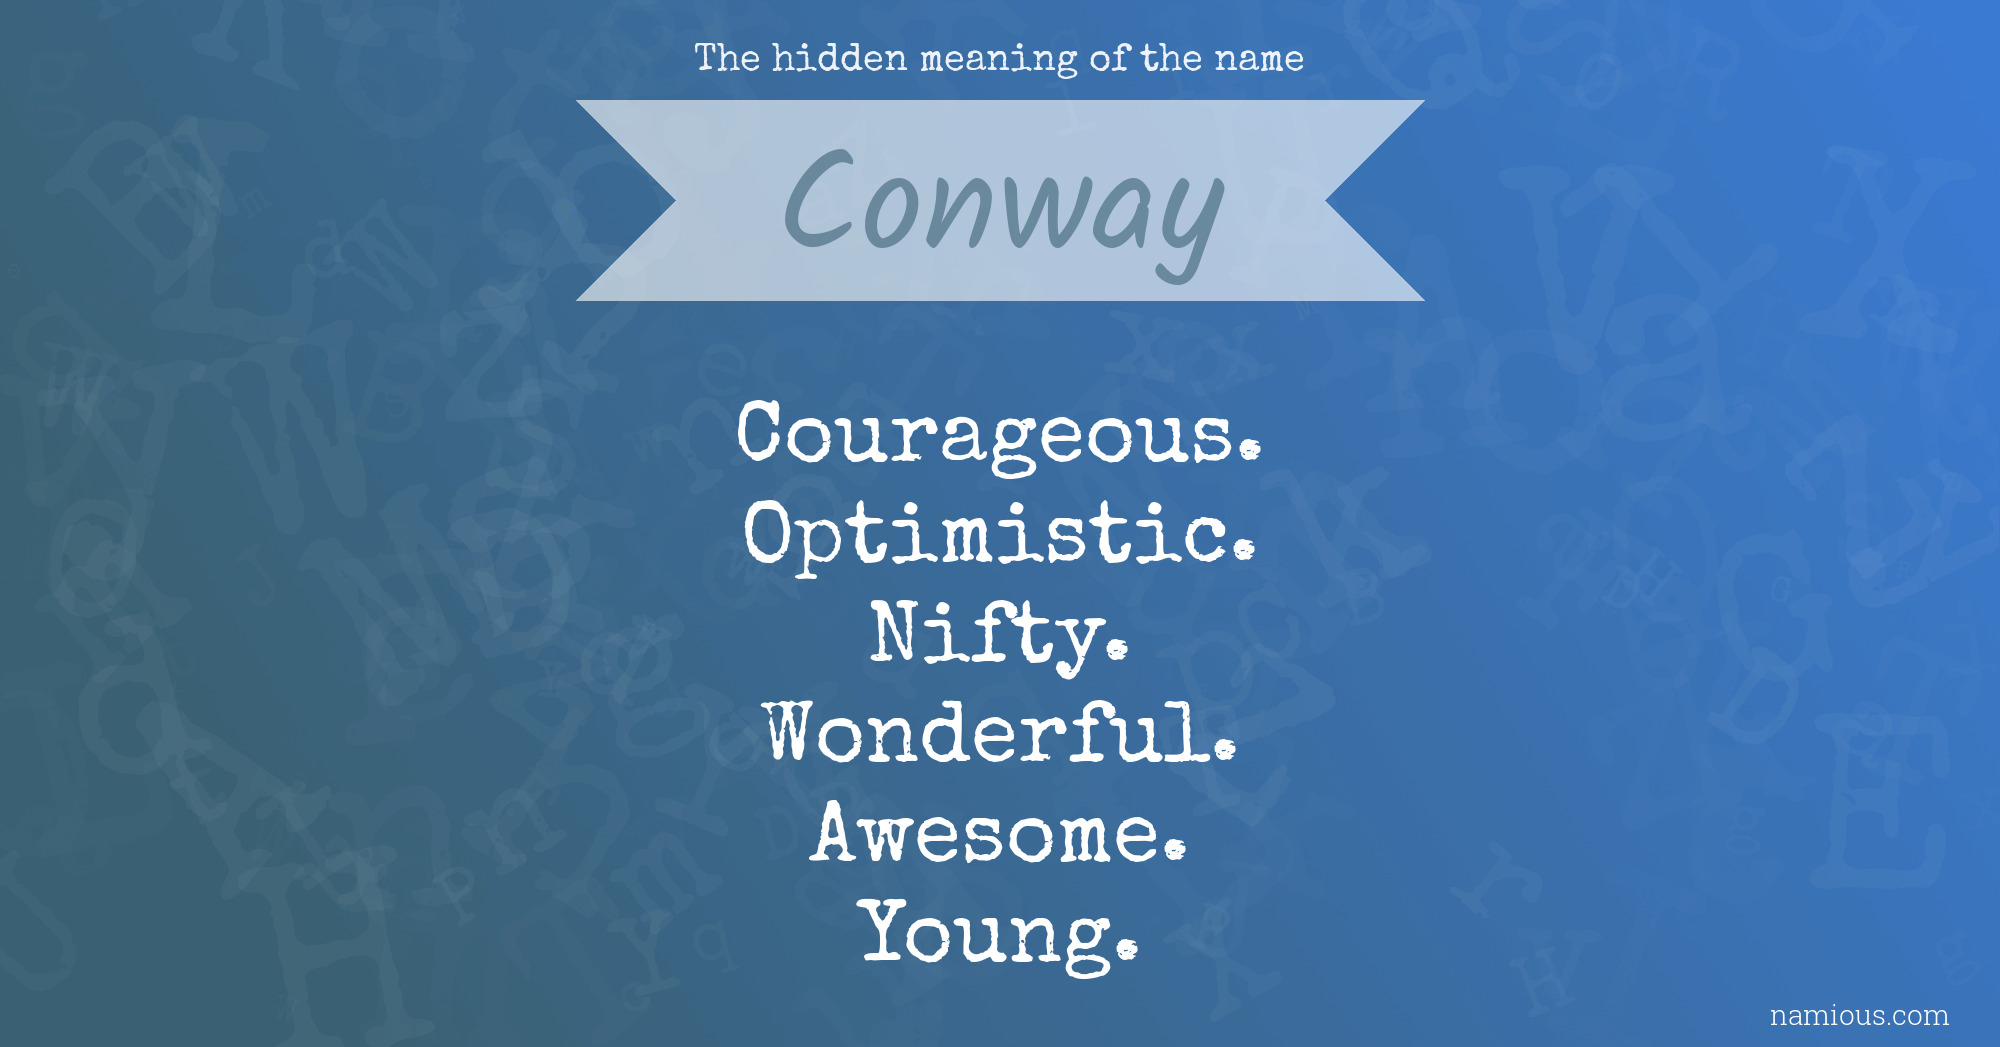 The hidden meaning of the name Conway